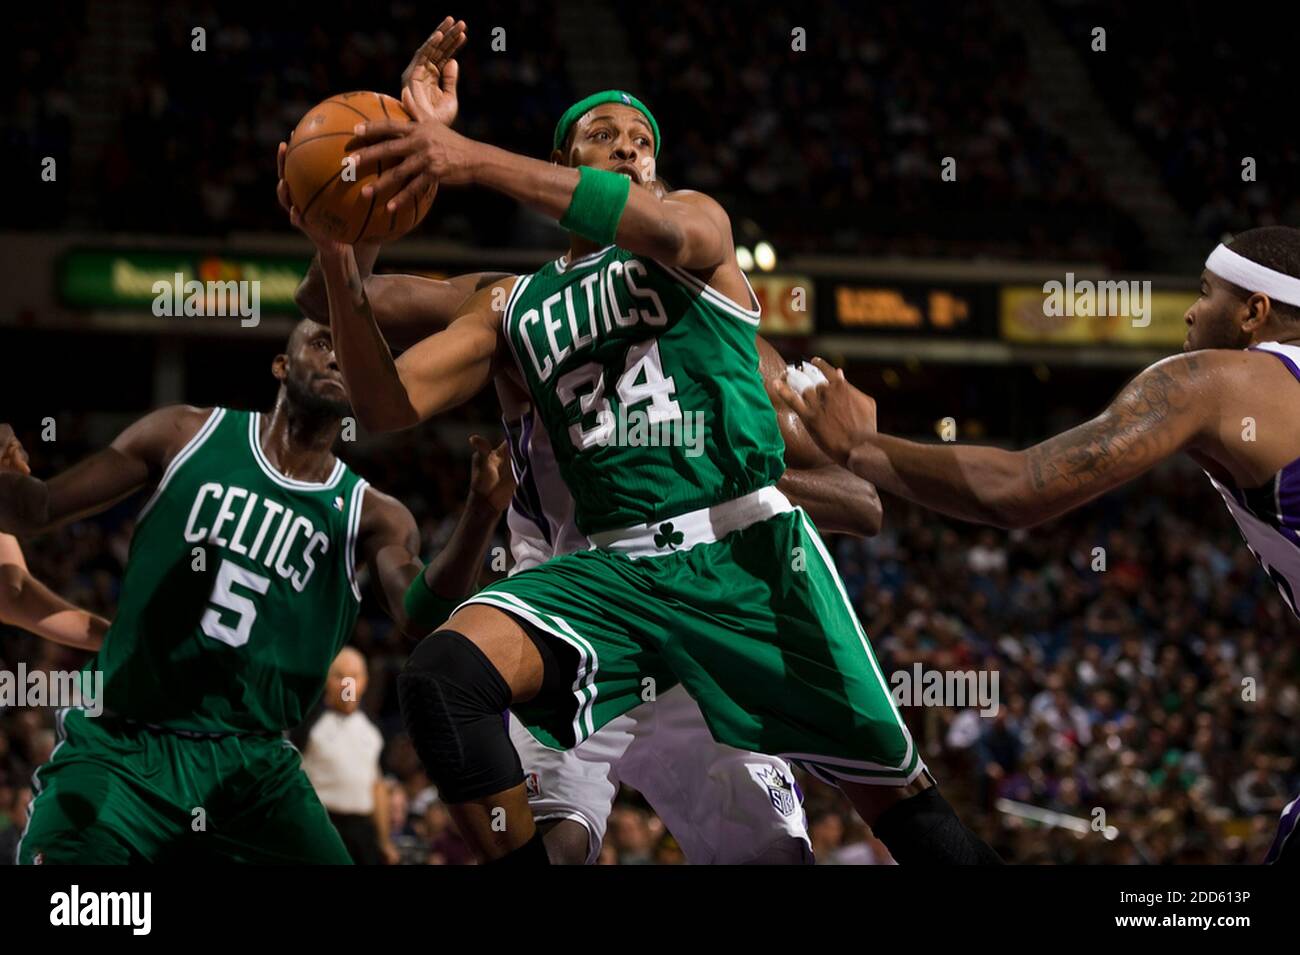 NO FILM, NO VIDEO, NO TV, NO DOCUMENTARY - The Boston Celtics' Paul Pierce  (34) passes off while driving to the basket in the fourth quarter during  the NBA Basketball match, Boston